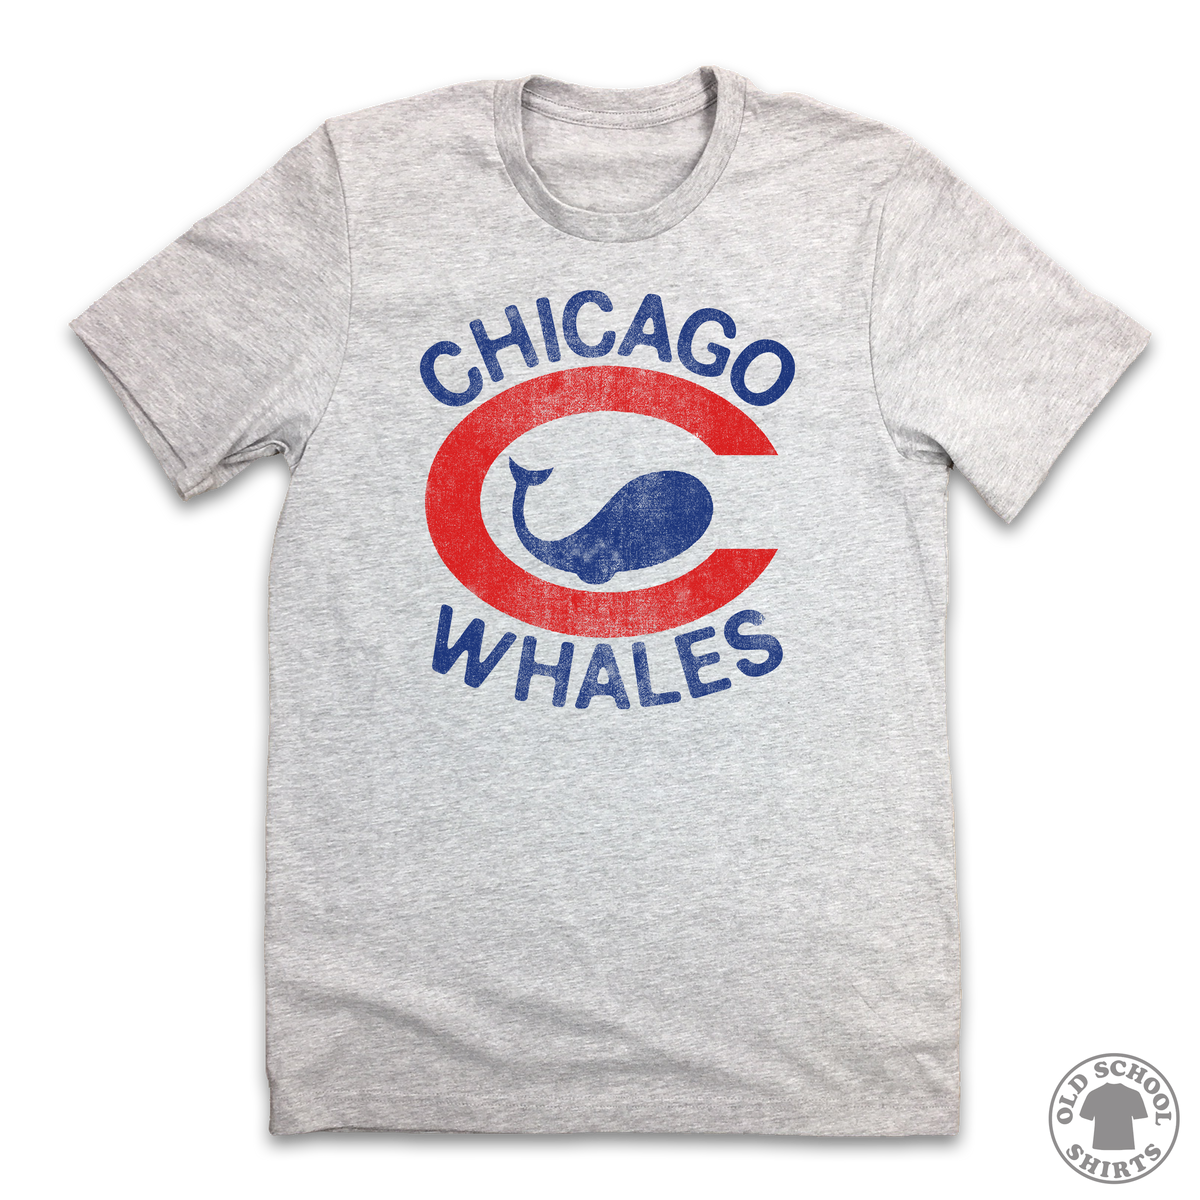 Chicago Whales - Old School Shirts- Retro Sports T Shirts